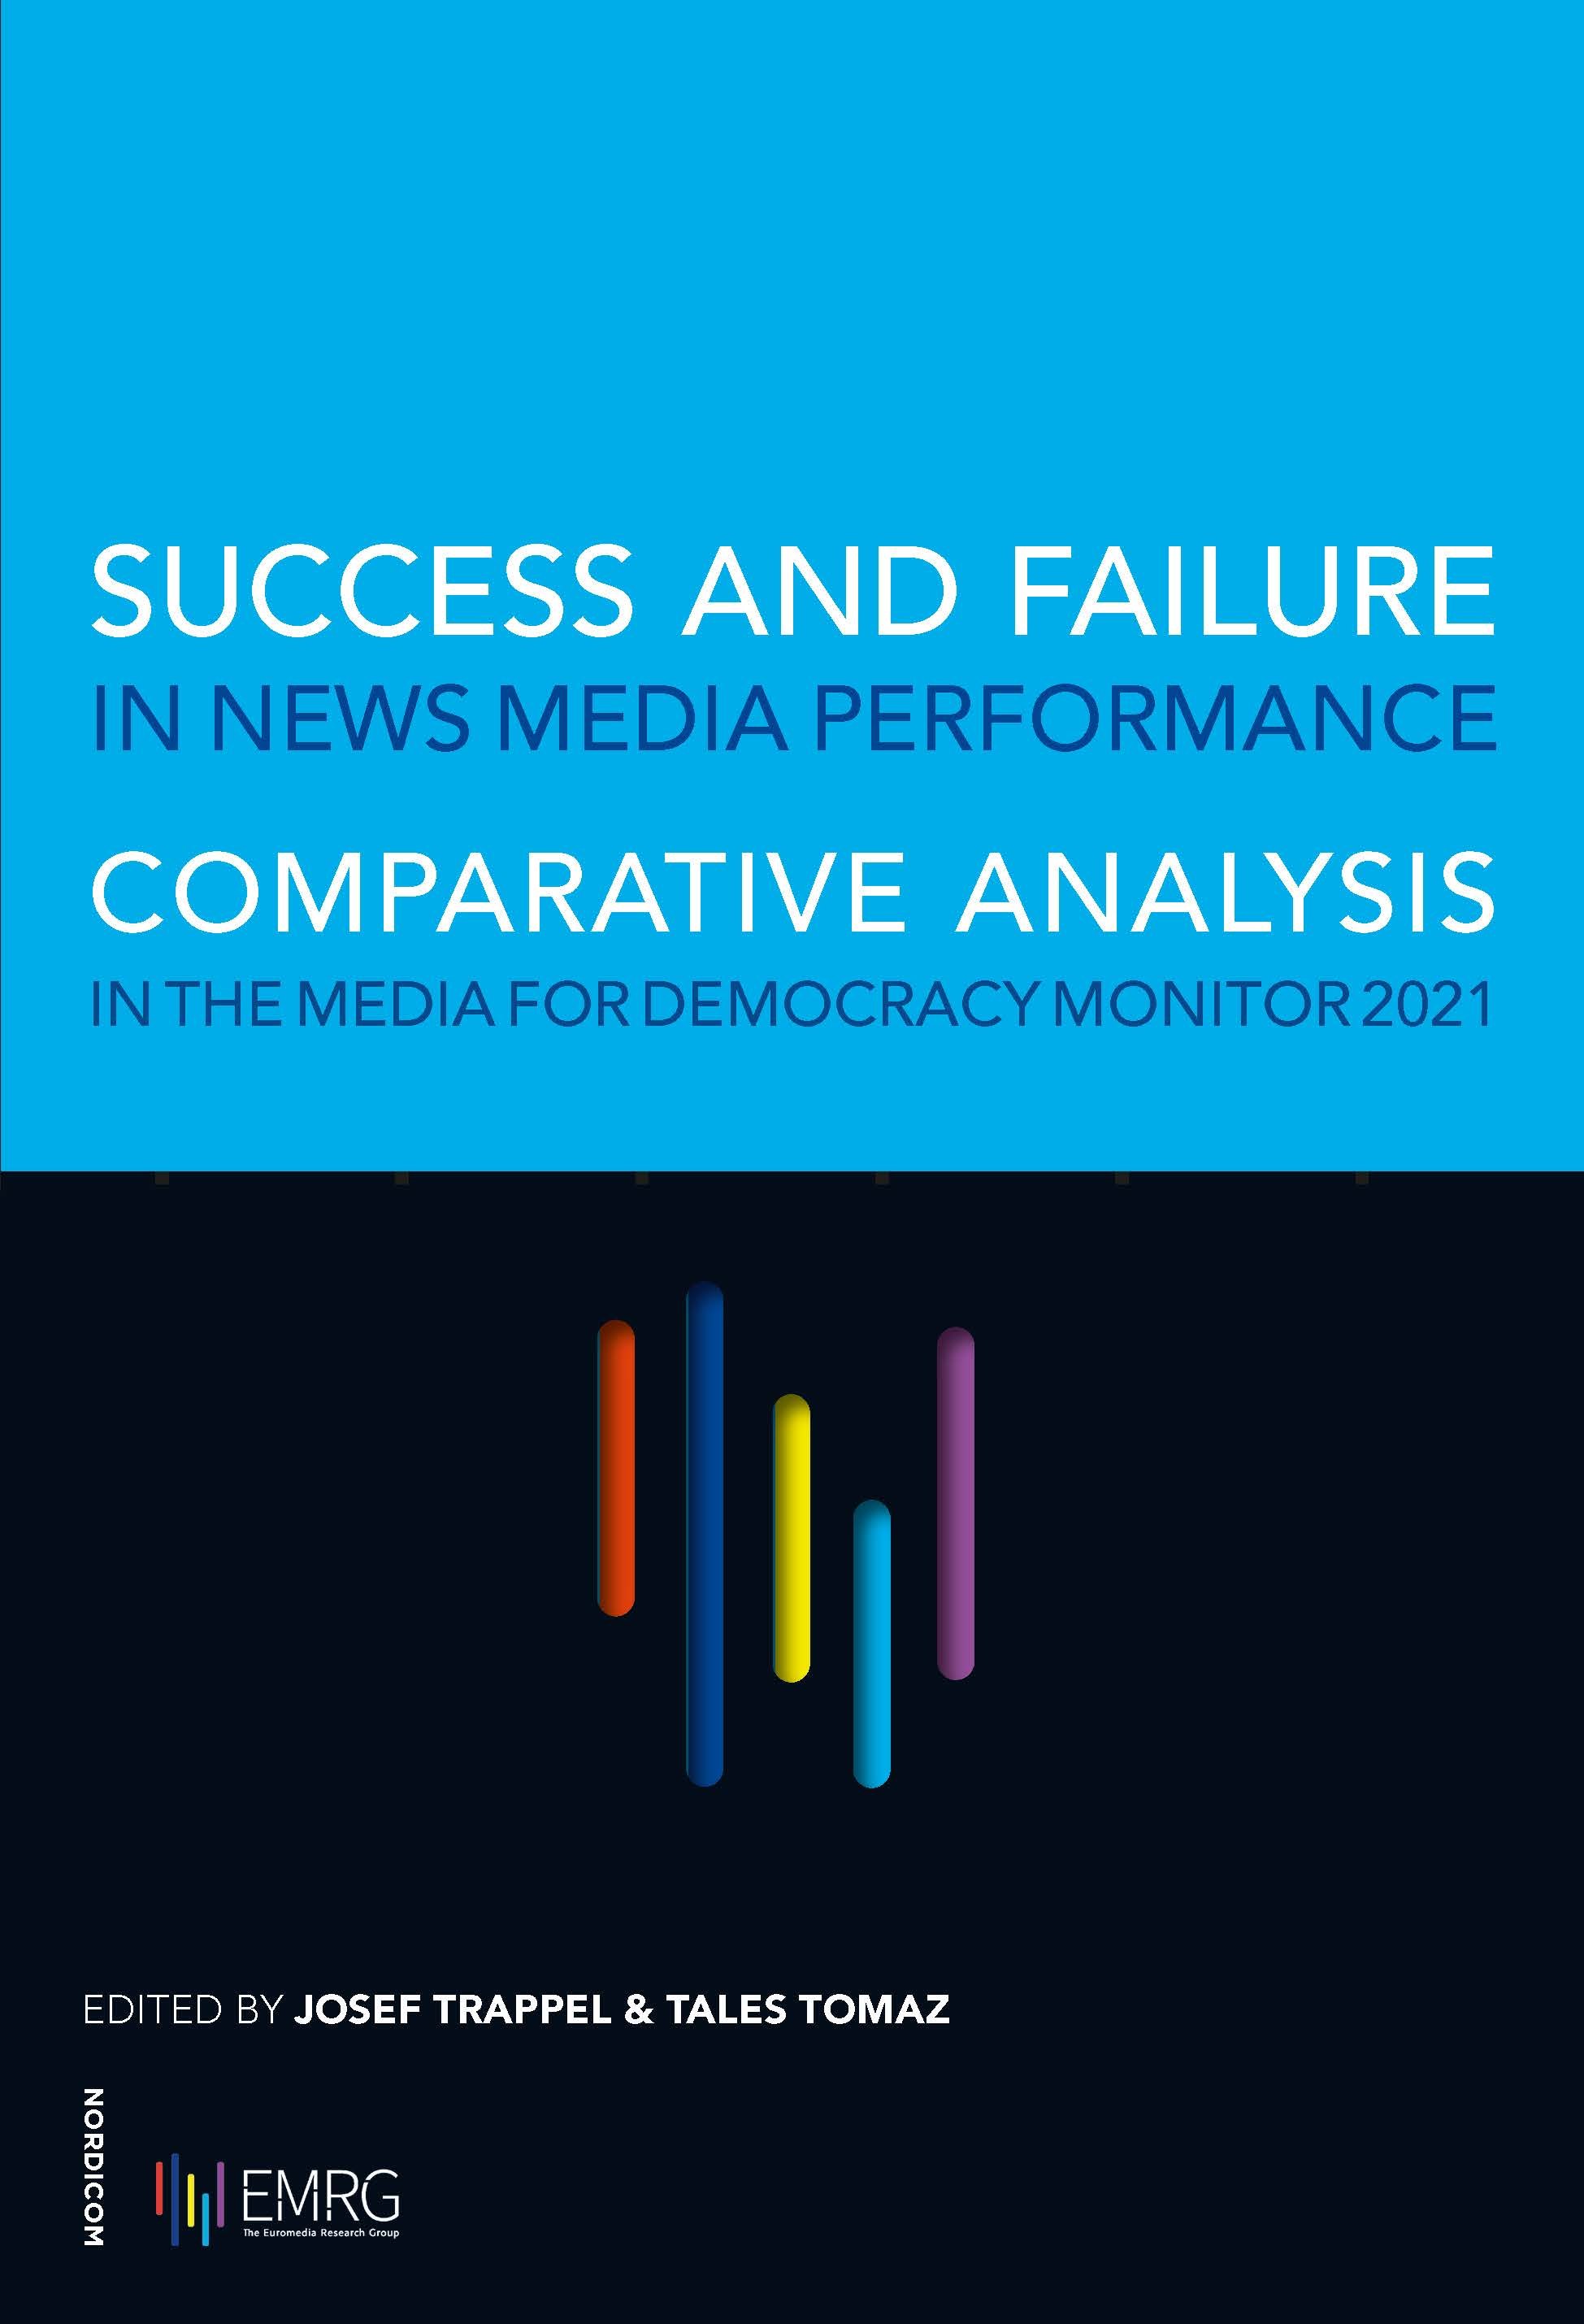 Cover to the book Success and Failure in news media performance